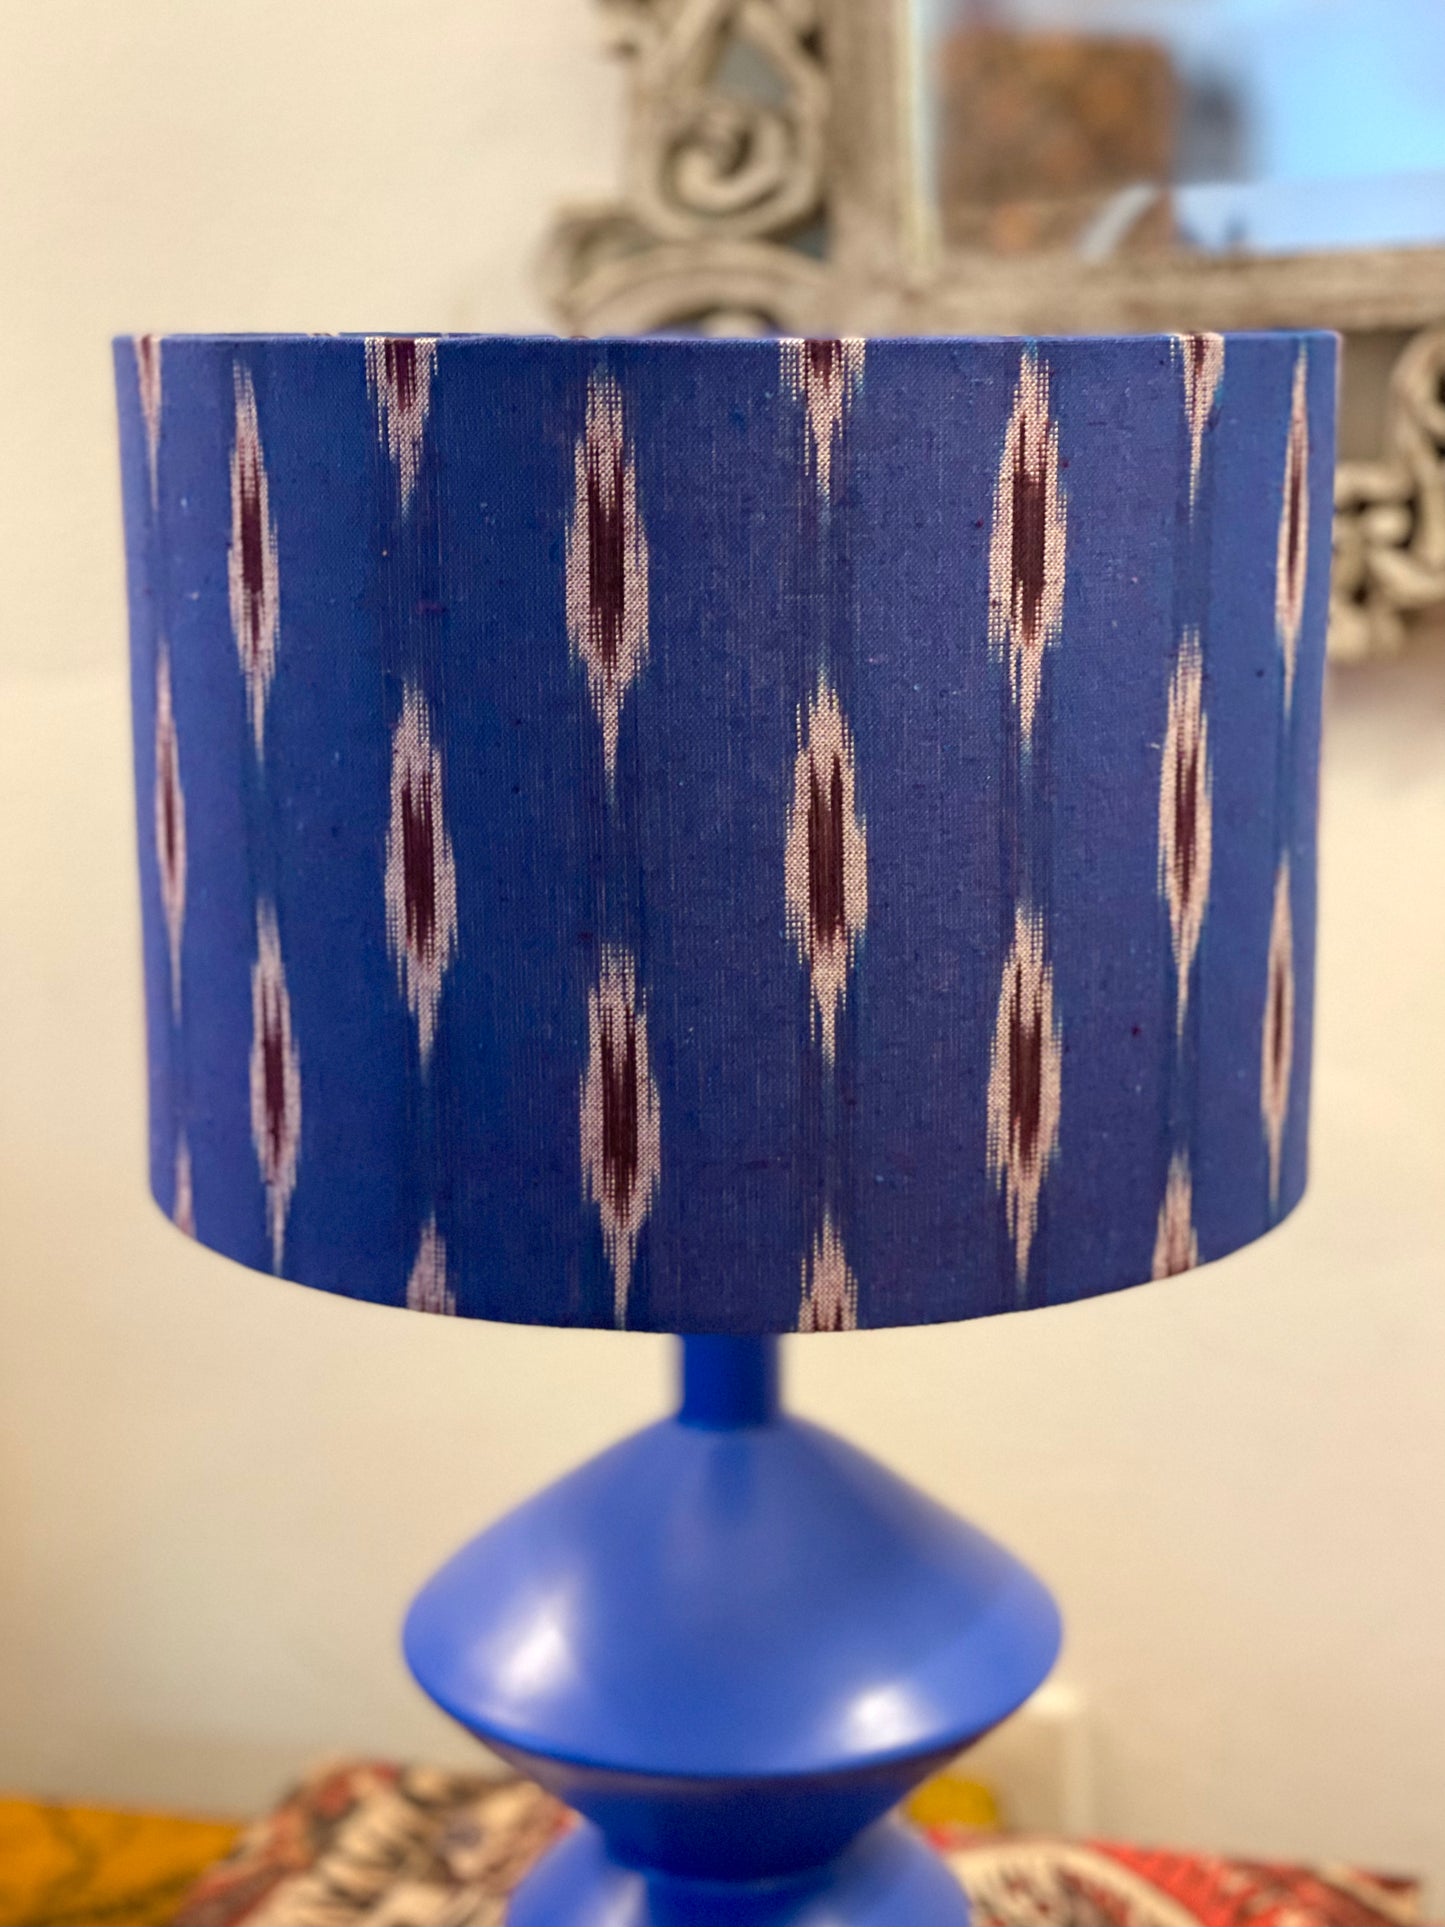 10 inch Drum Lampshade. Indian Pochampally Ikat Weave Cotton Fabric. Royal Blue with Licorice and White.